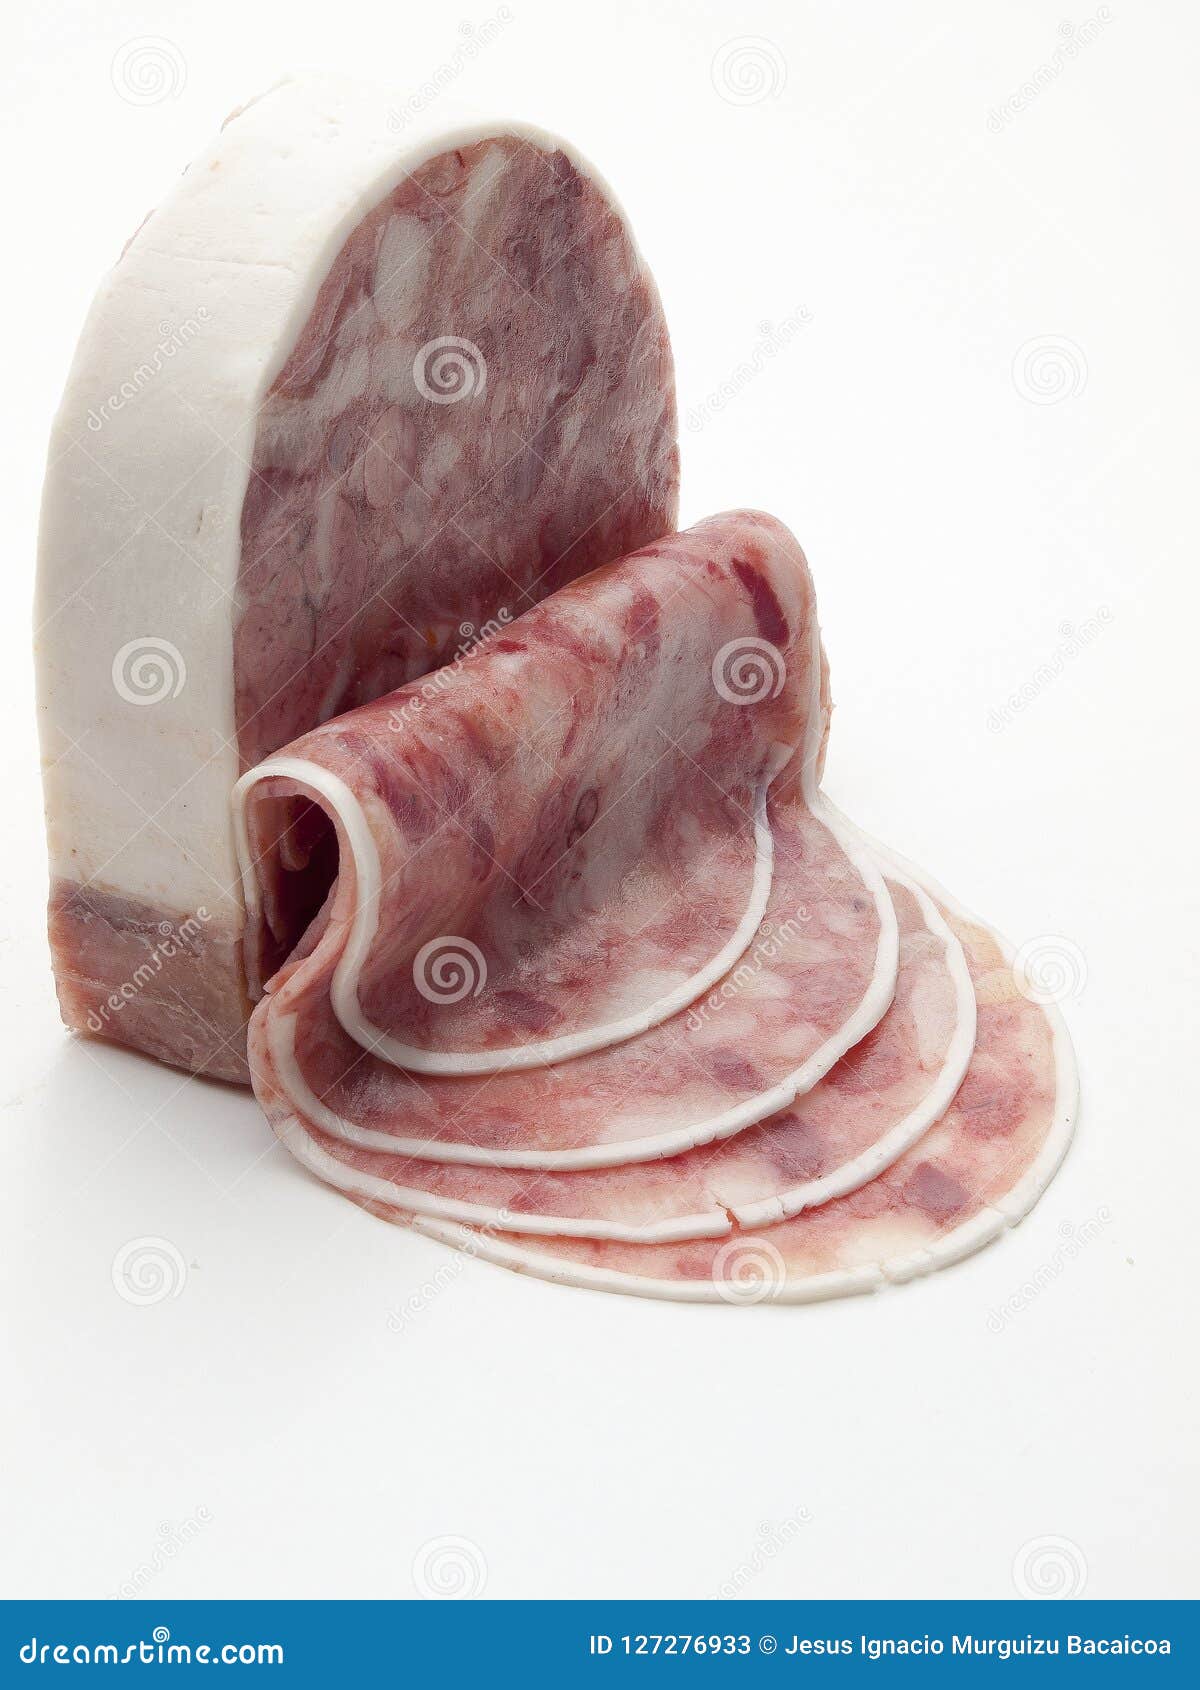 piece of sausage of wild boar meat cut into slices.